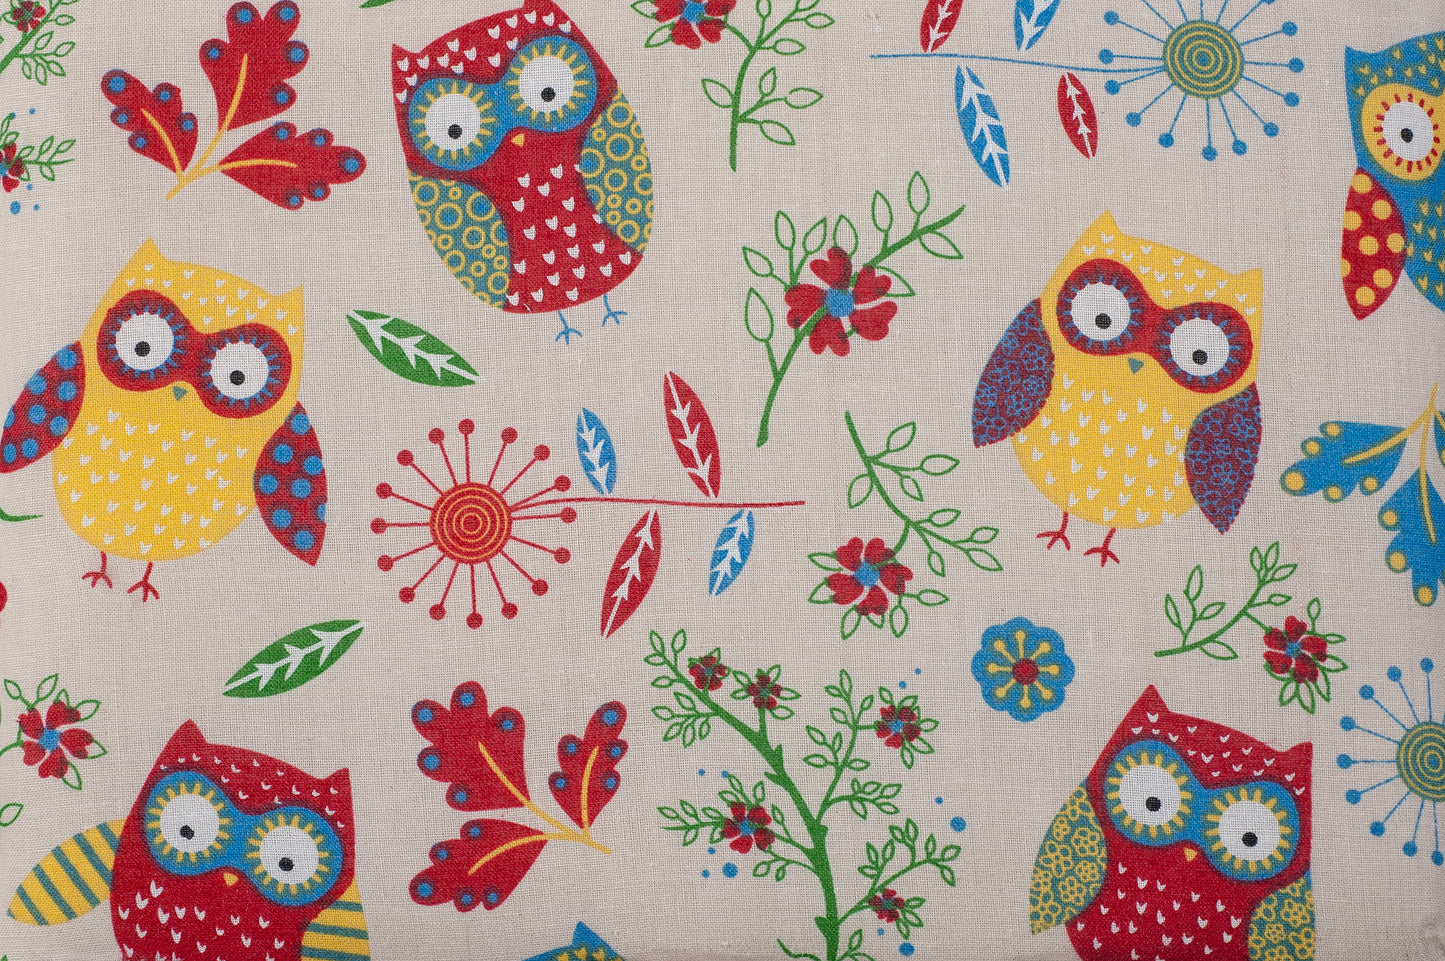 Hobby Gift Craft Bag with Wooden Handles Owl Print